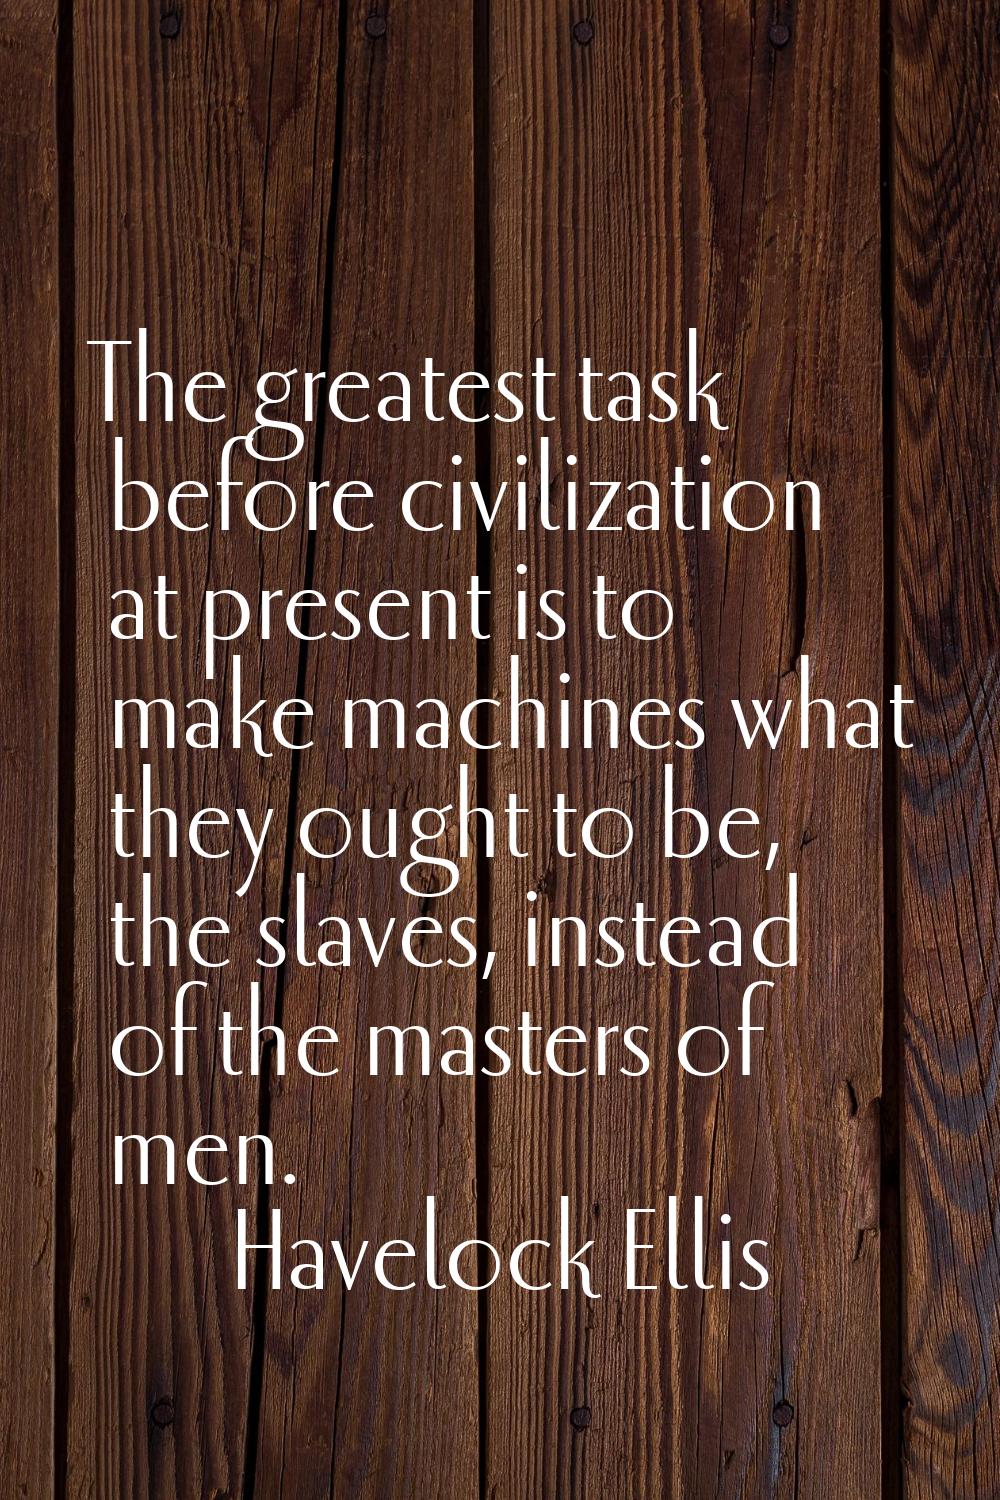 The greatest task before civilization at present is to make machines what they ought to be, the sla